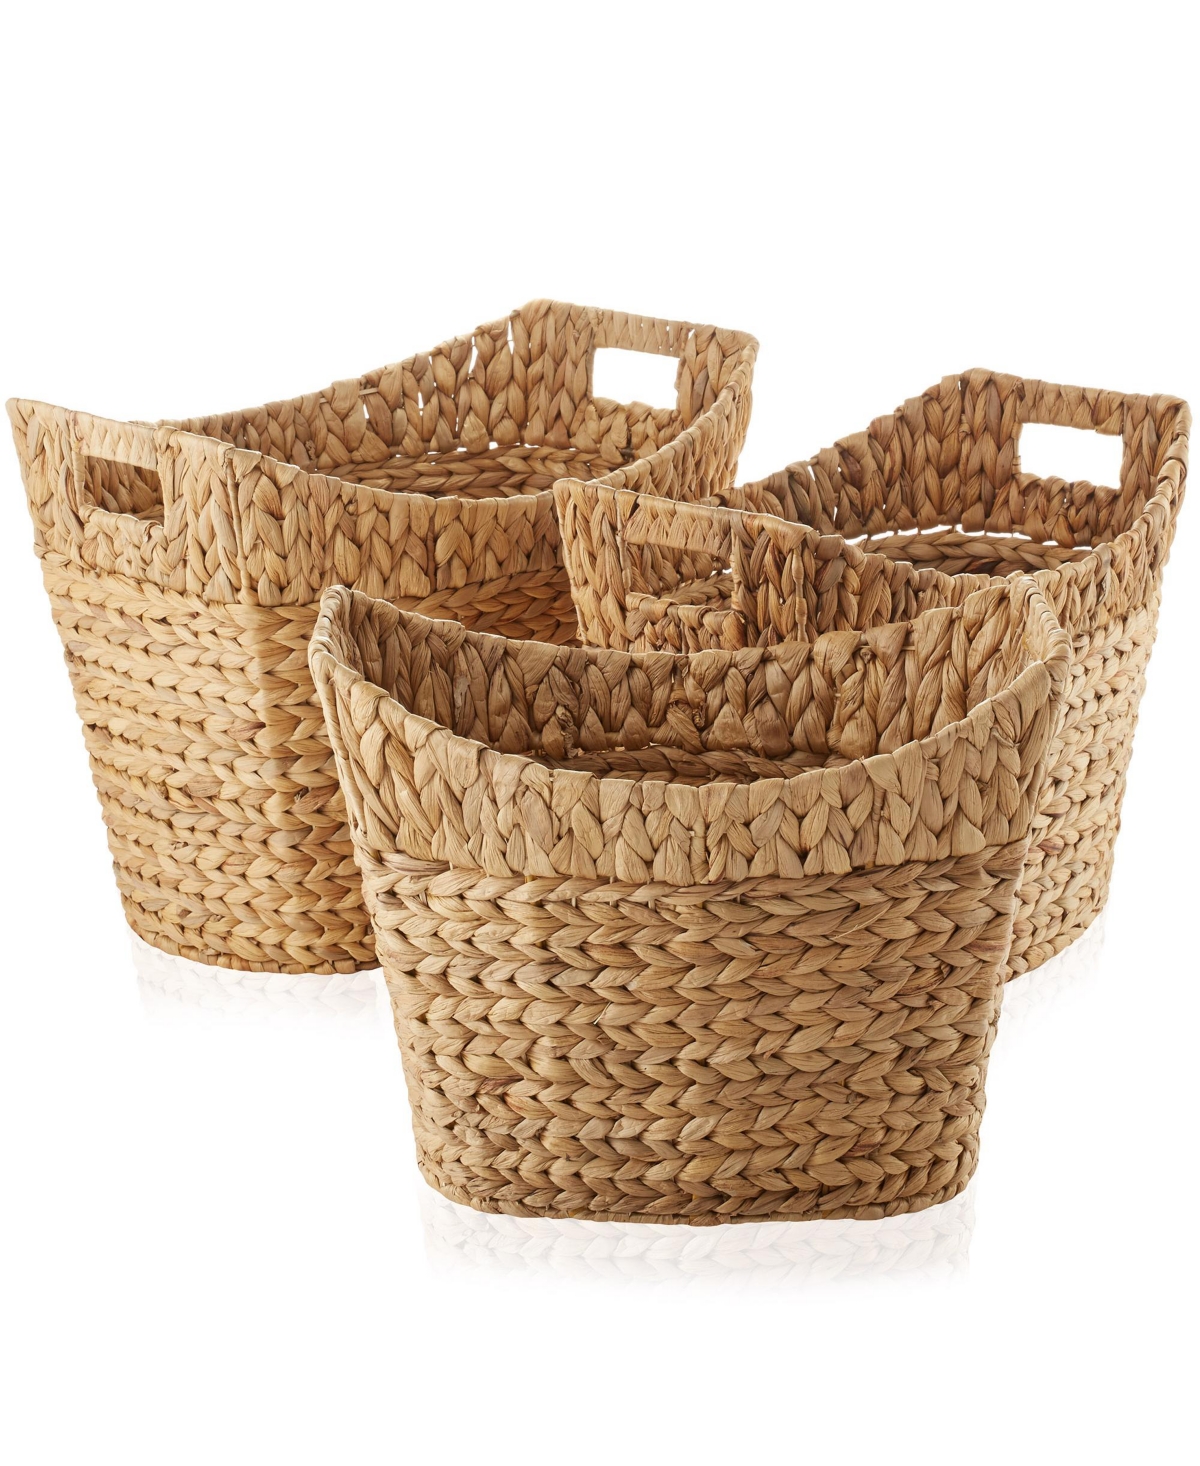 Set of 3 Oval Baskets with Handles, Water Hyacinth Woven Storage Totes for Blankets, Laundry, Bathroom, Bedroom, Living Room - Natural